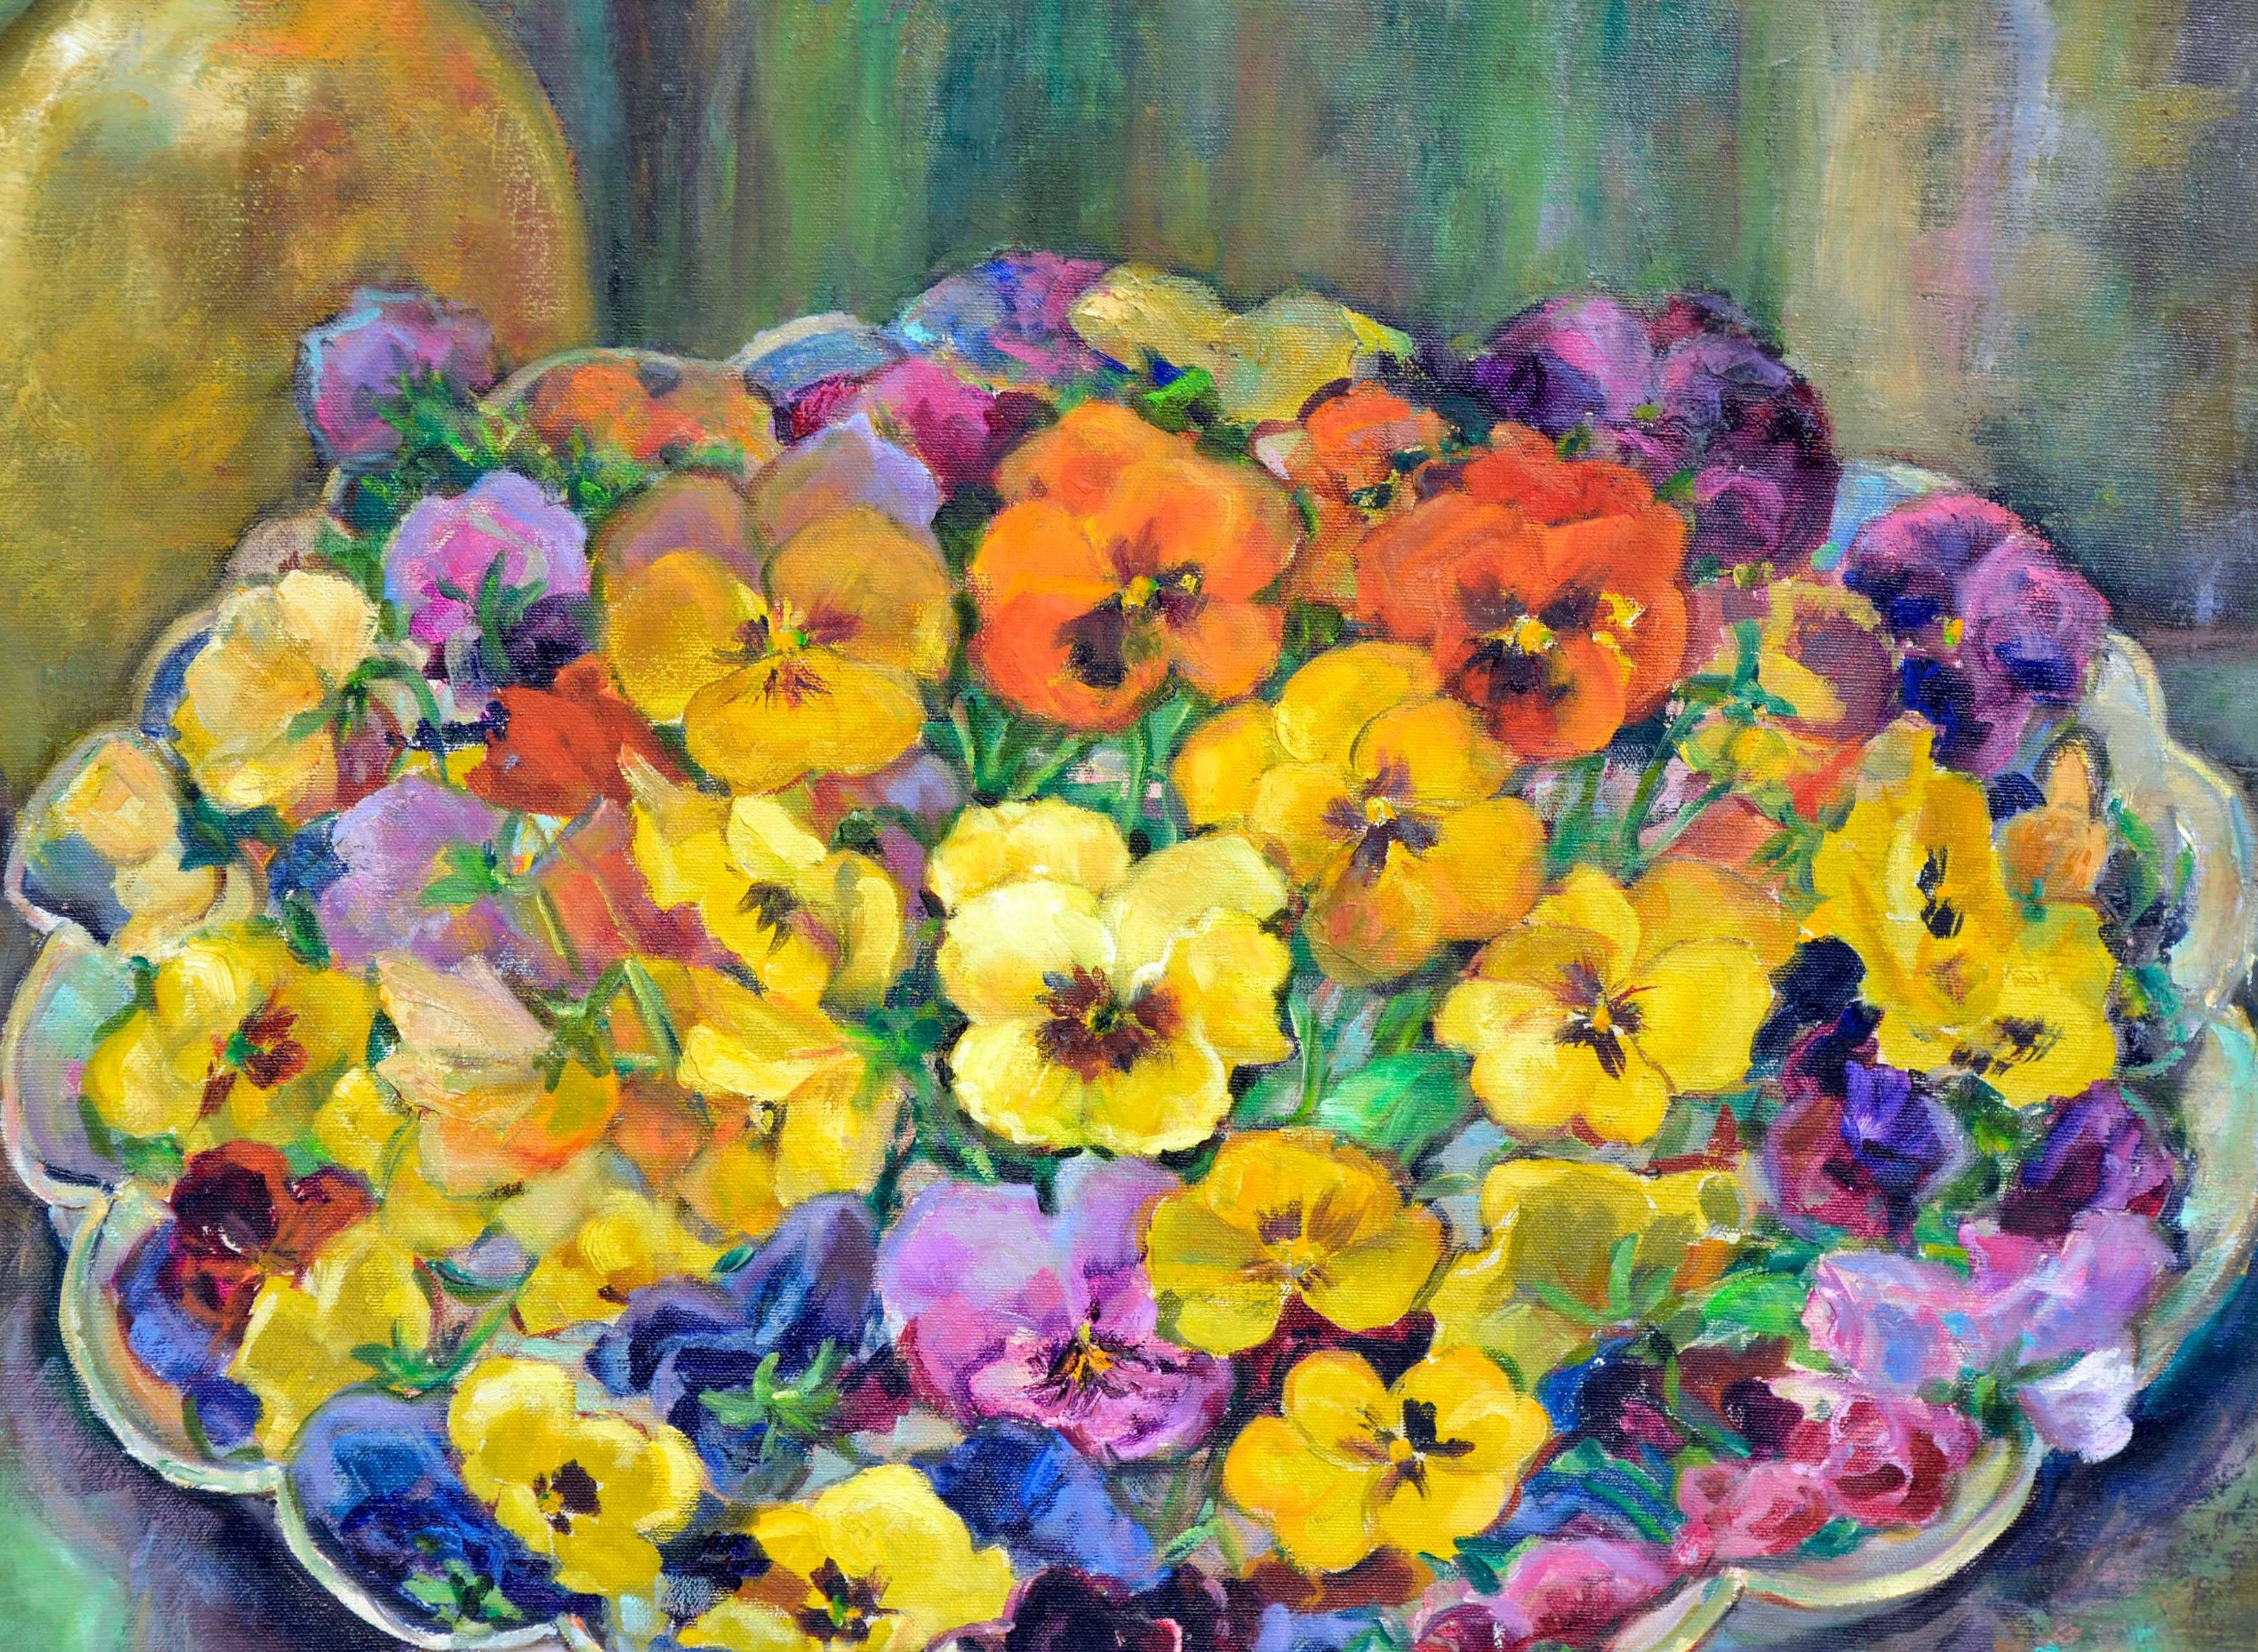 Pansies Still Life - American Impressionist Painting by Helen Enoch Gleiforst